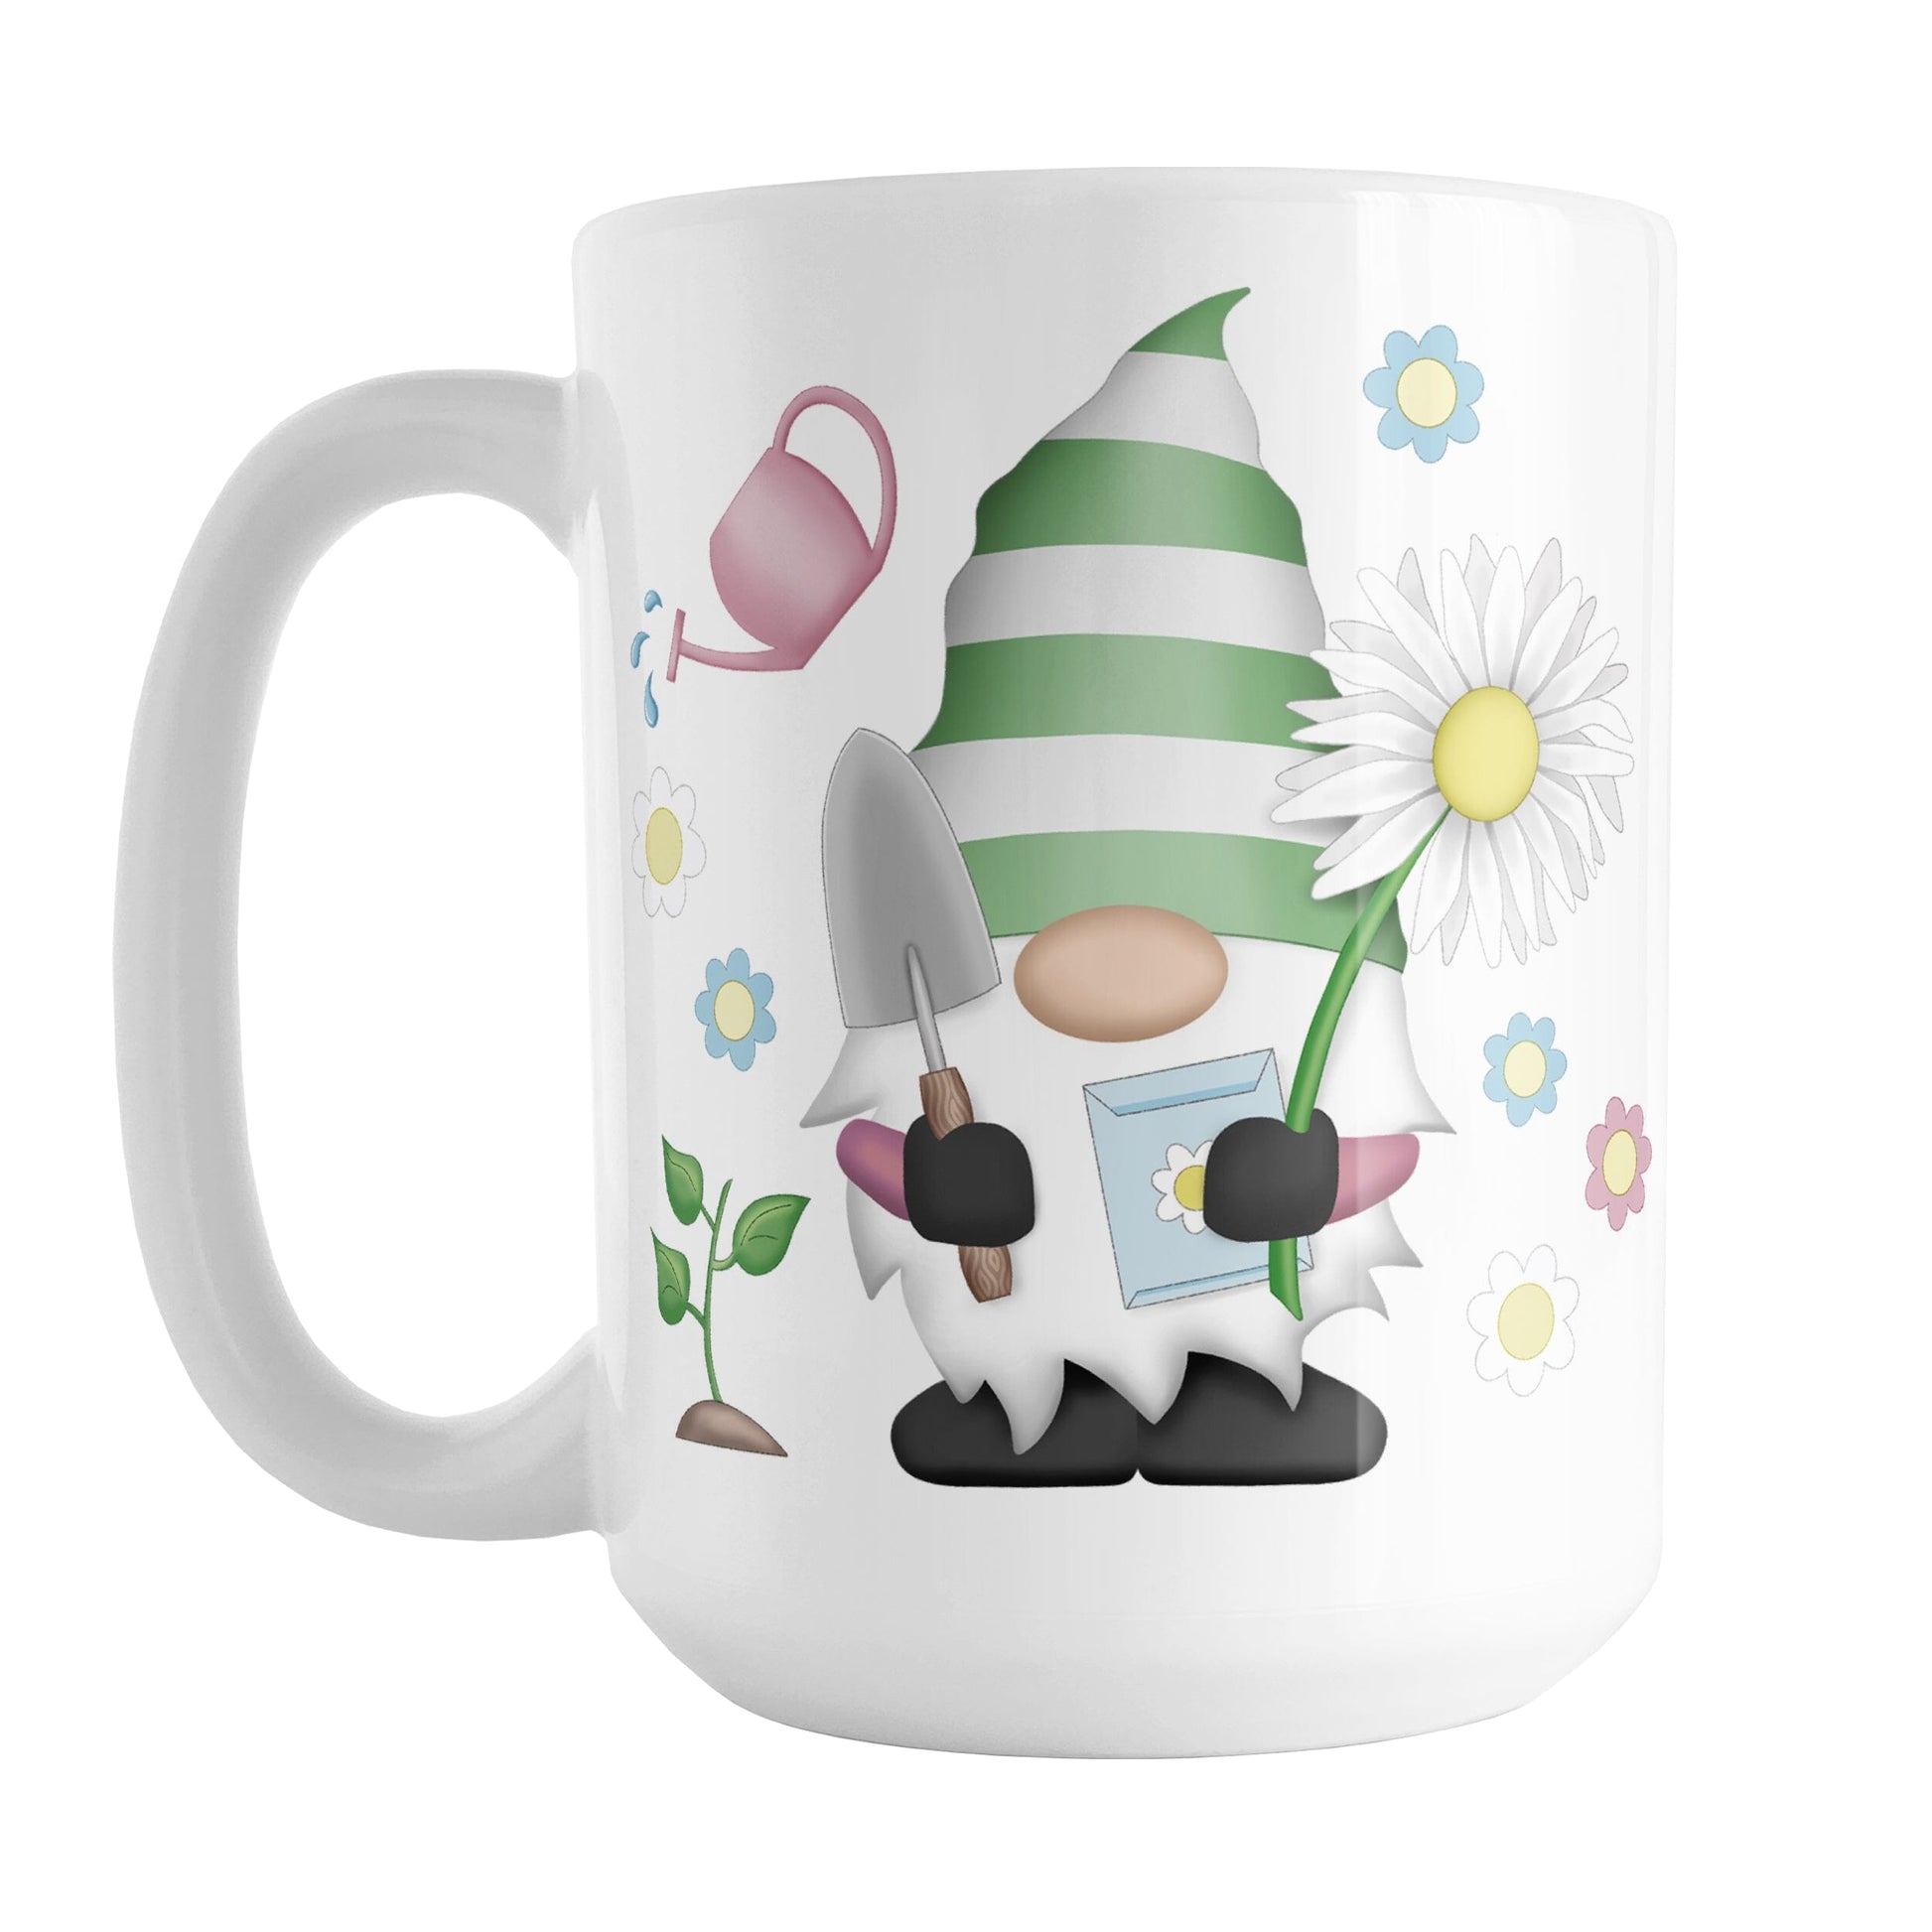 Spring Gardening Gnome Mug (15oz) at Amy's Coffee Mugs. A ceramic coffee mug designed with an adorable gnome in spring colors holding a gardening spade, seeds packet, and an oversized daisy, with a plant, watering can and flowers around him.